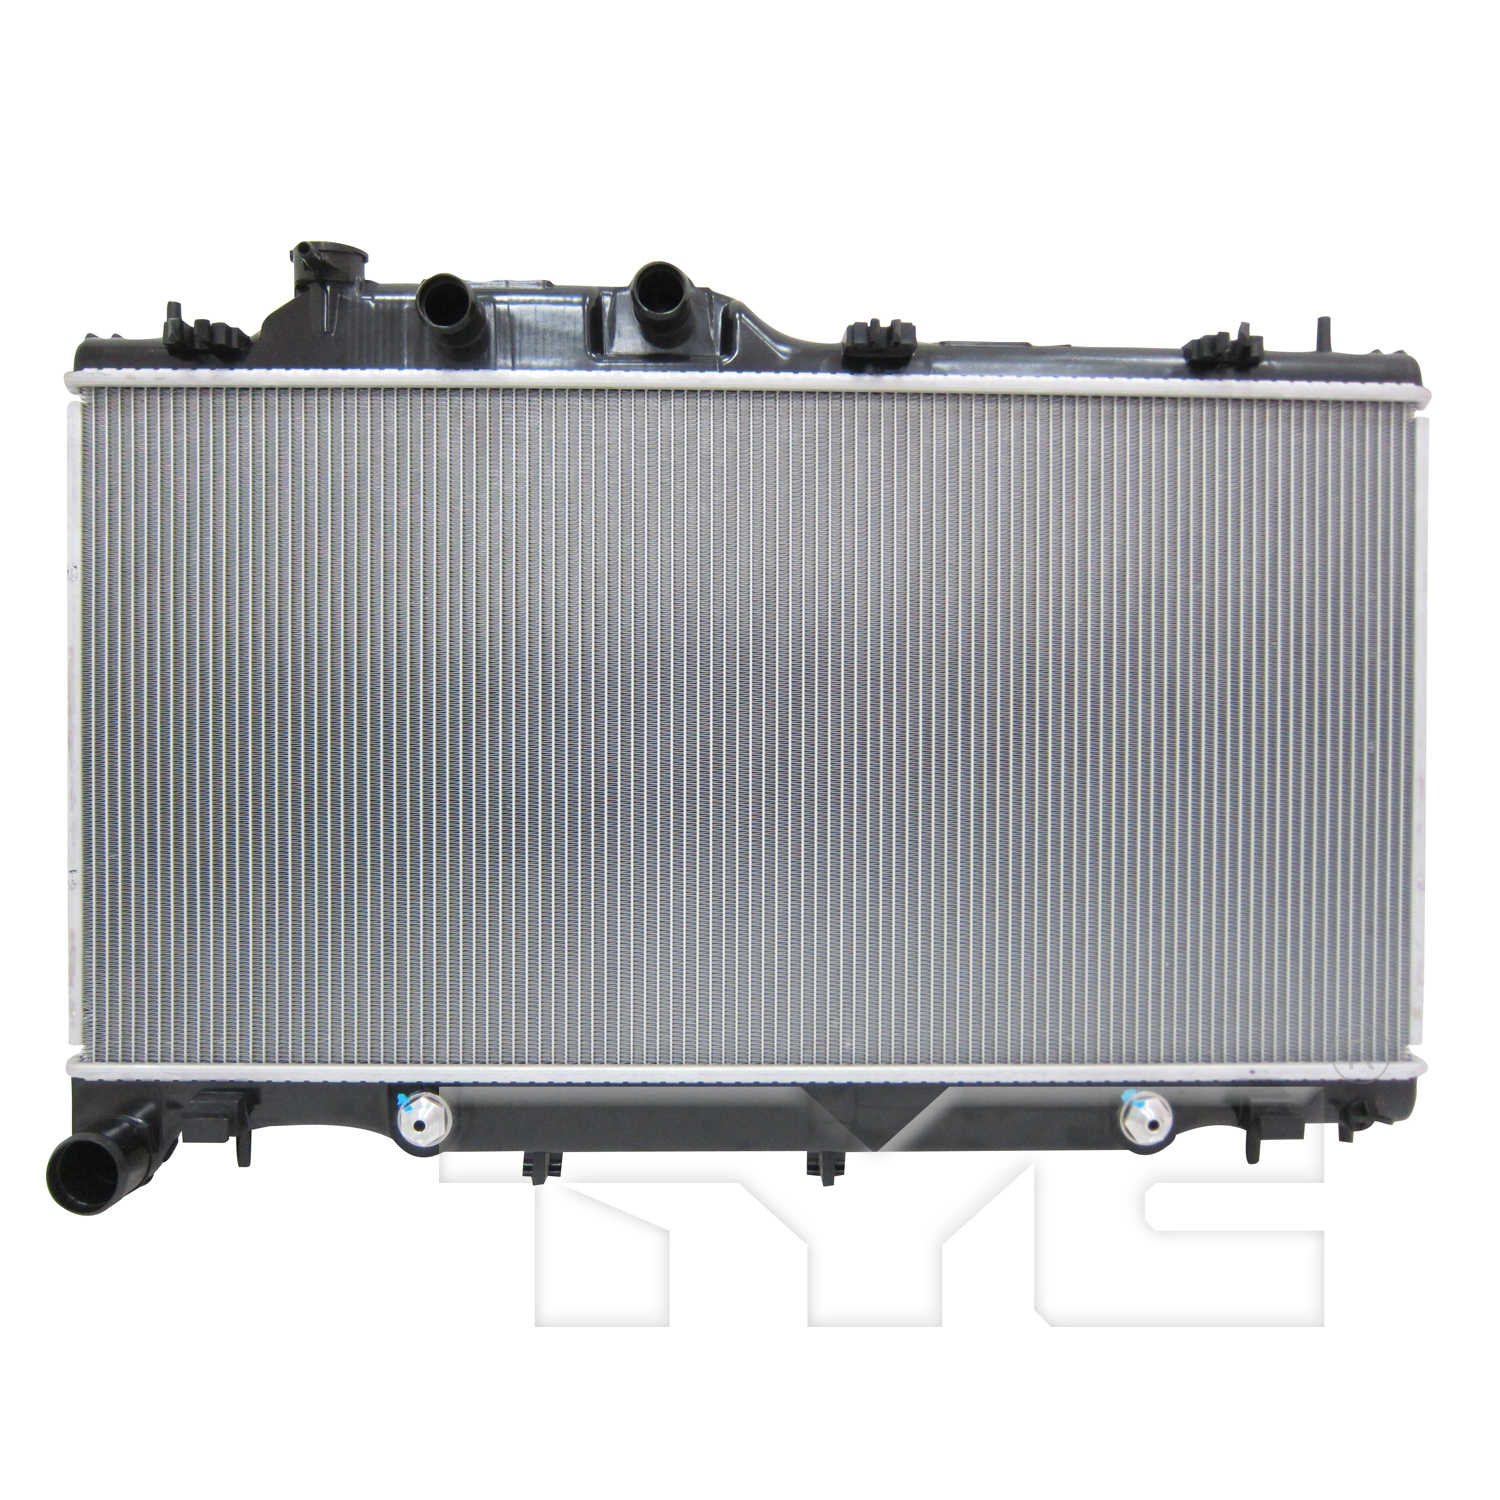 Aftermarket RADIATORS for SUBARU - OUTBACK, OUTBACK,15-19,Radiator assembly